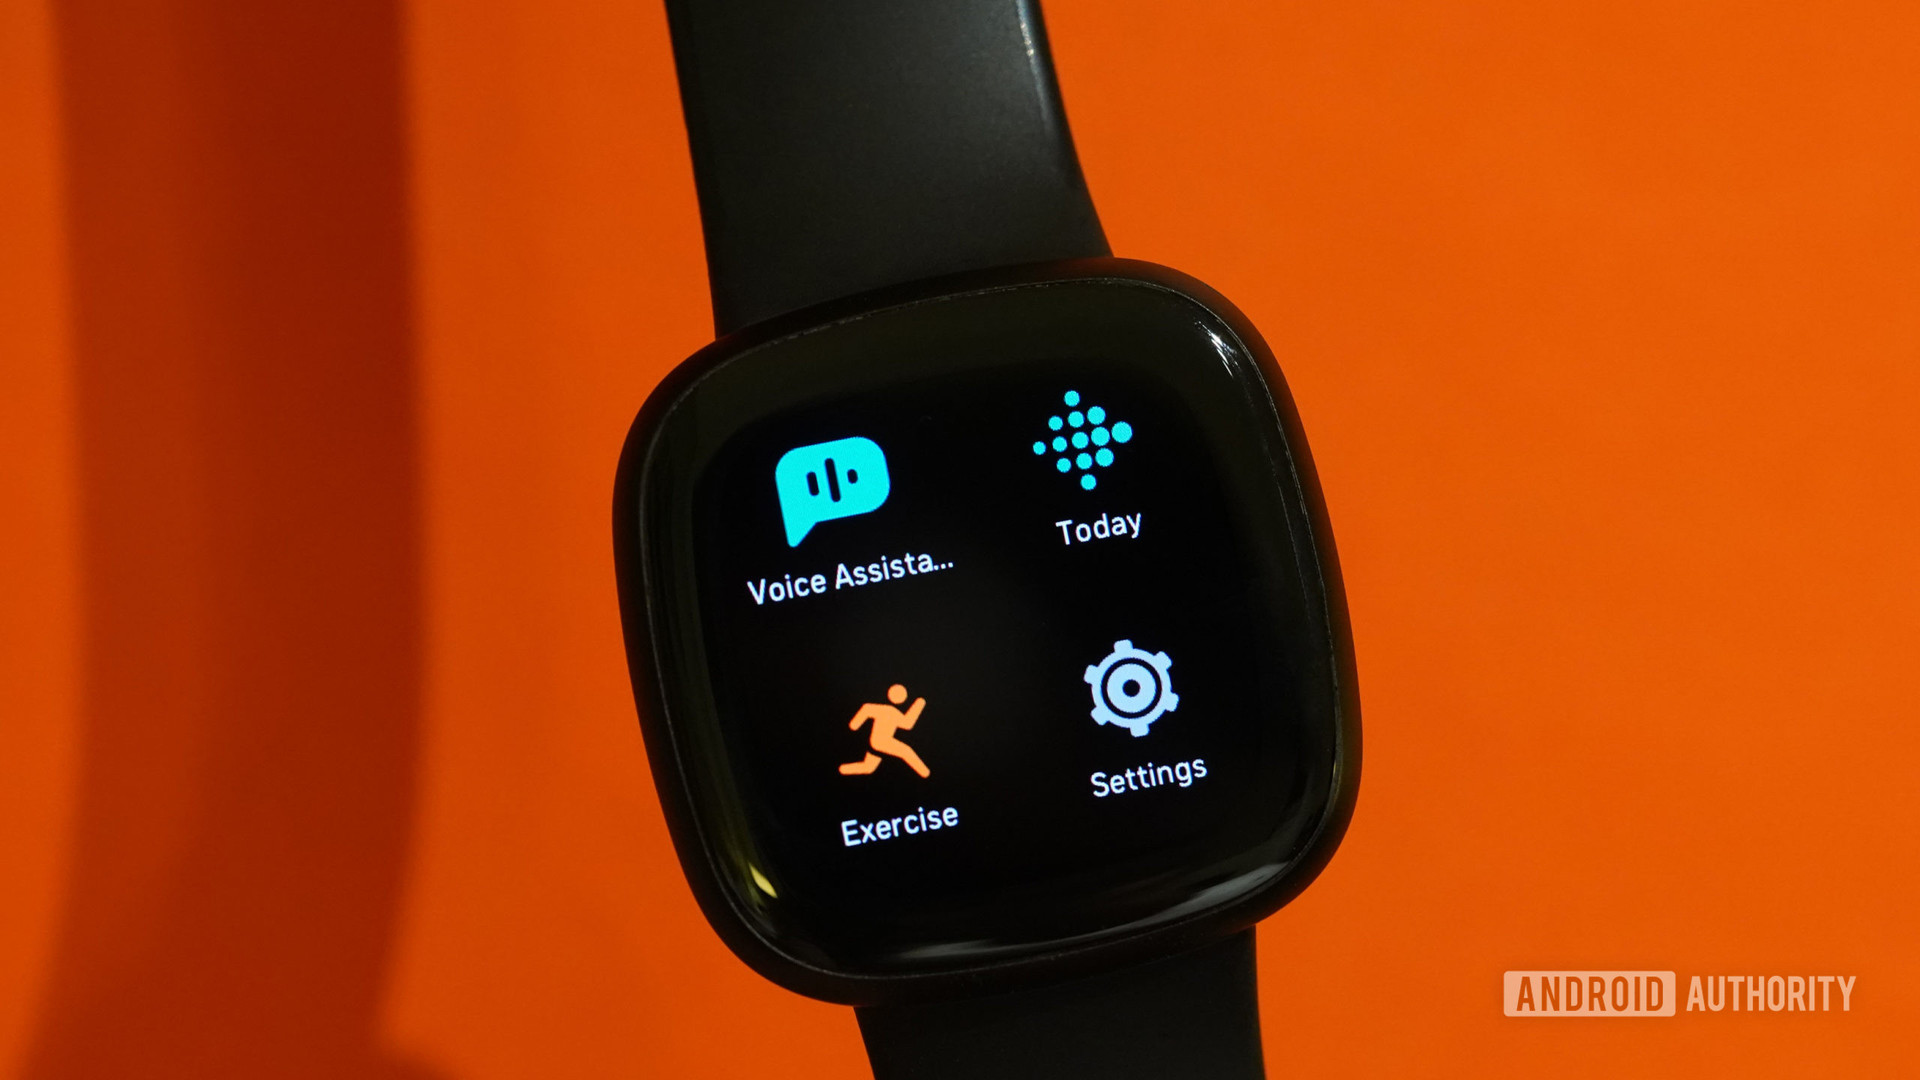 A fitbit versa 3, the best cheap smartwatch from the fitbit lineup, displays apps in front of an orange background